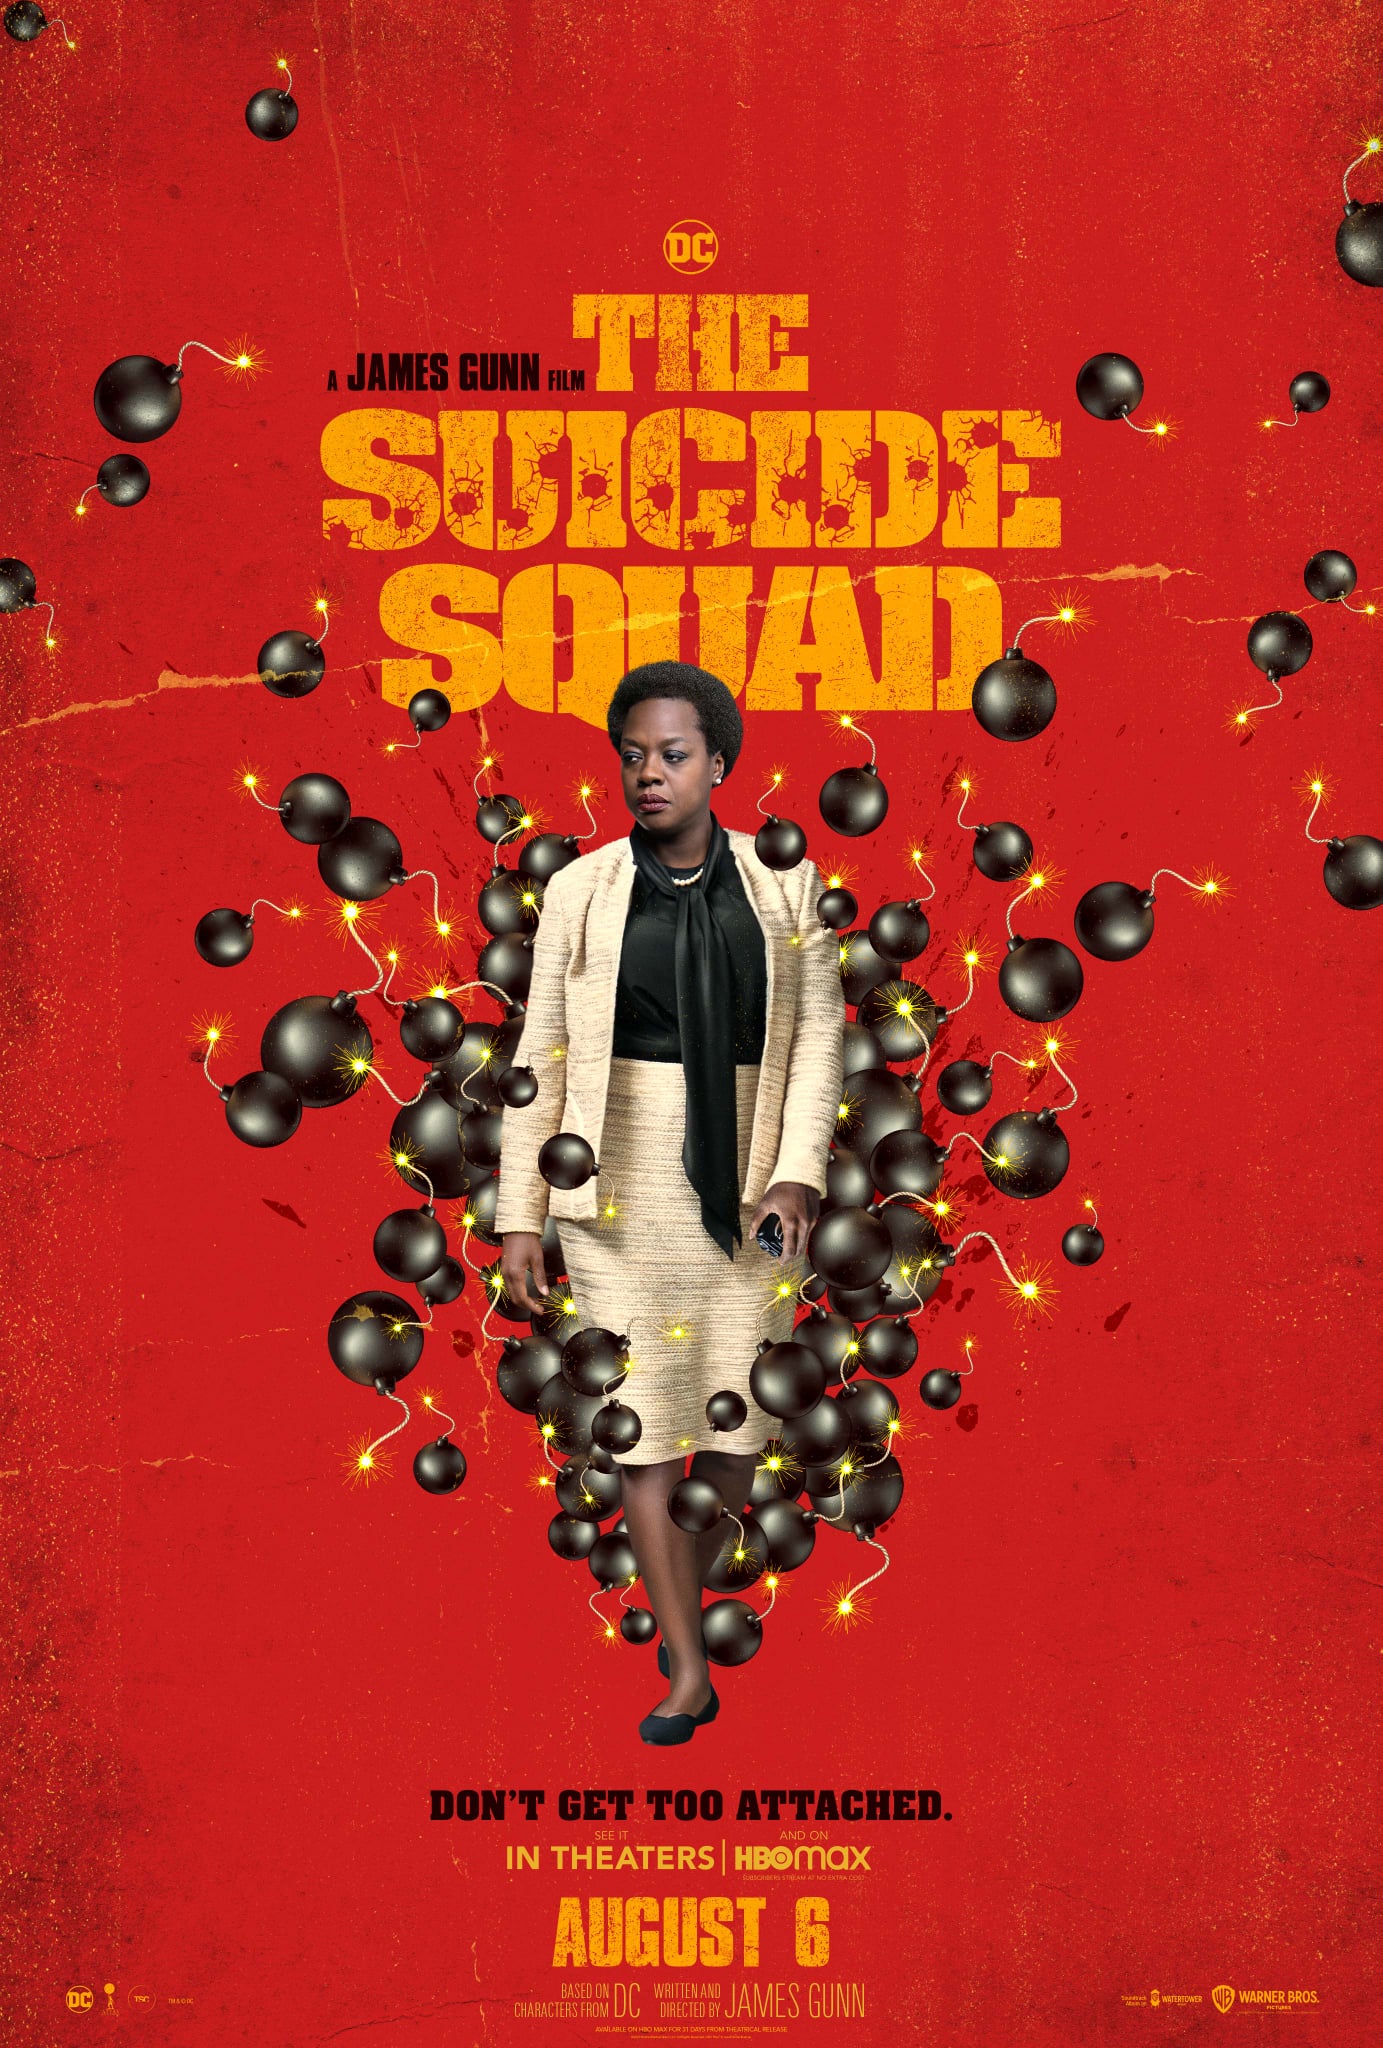 The Suicide Squad character poster